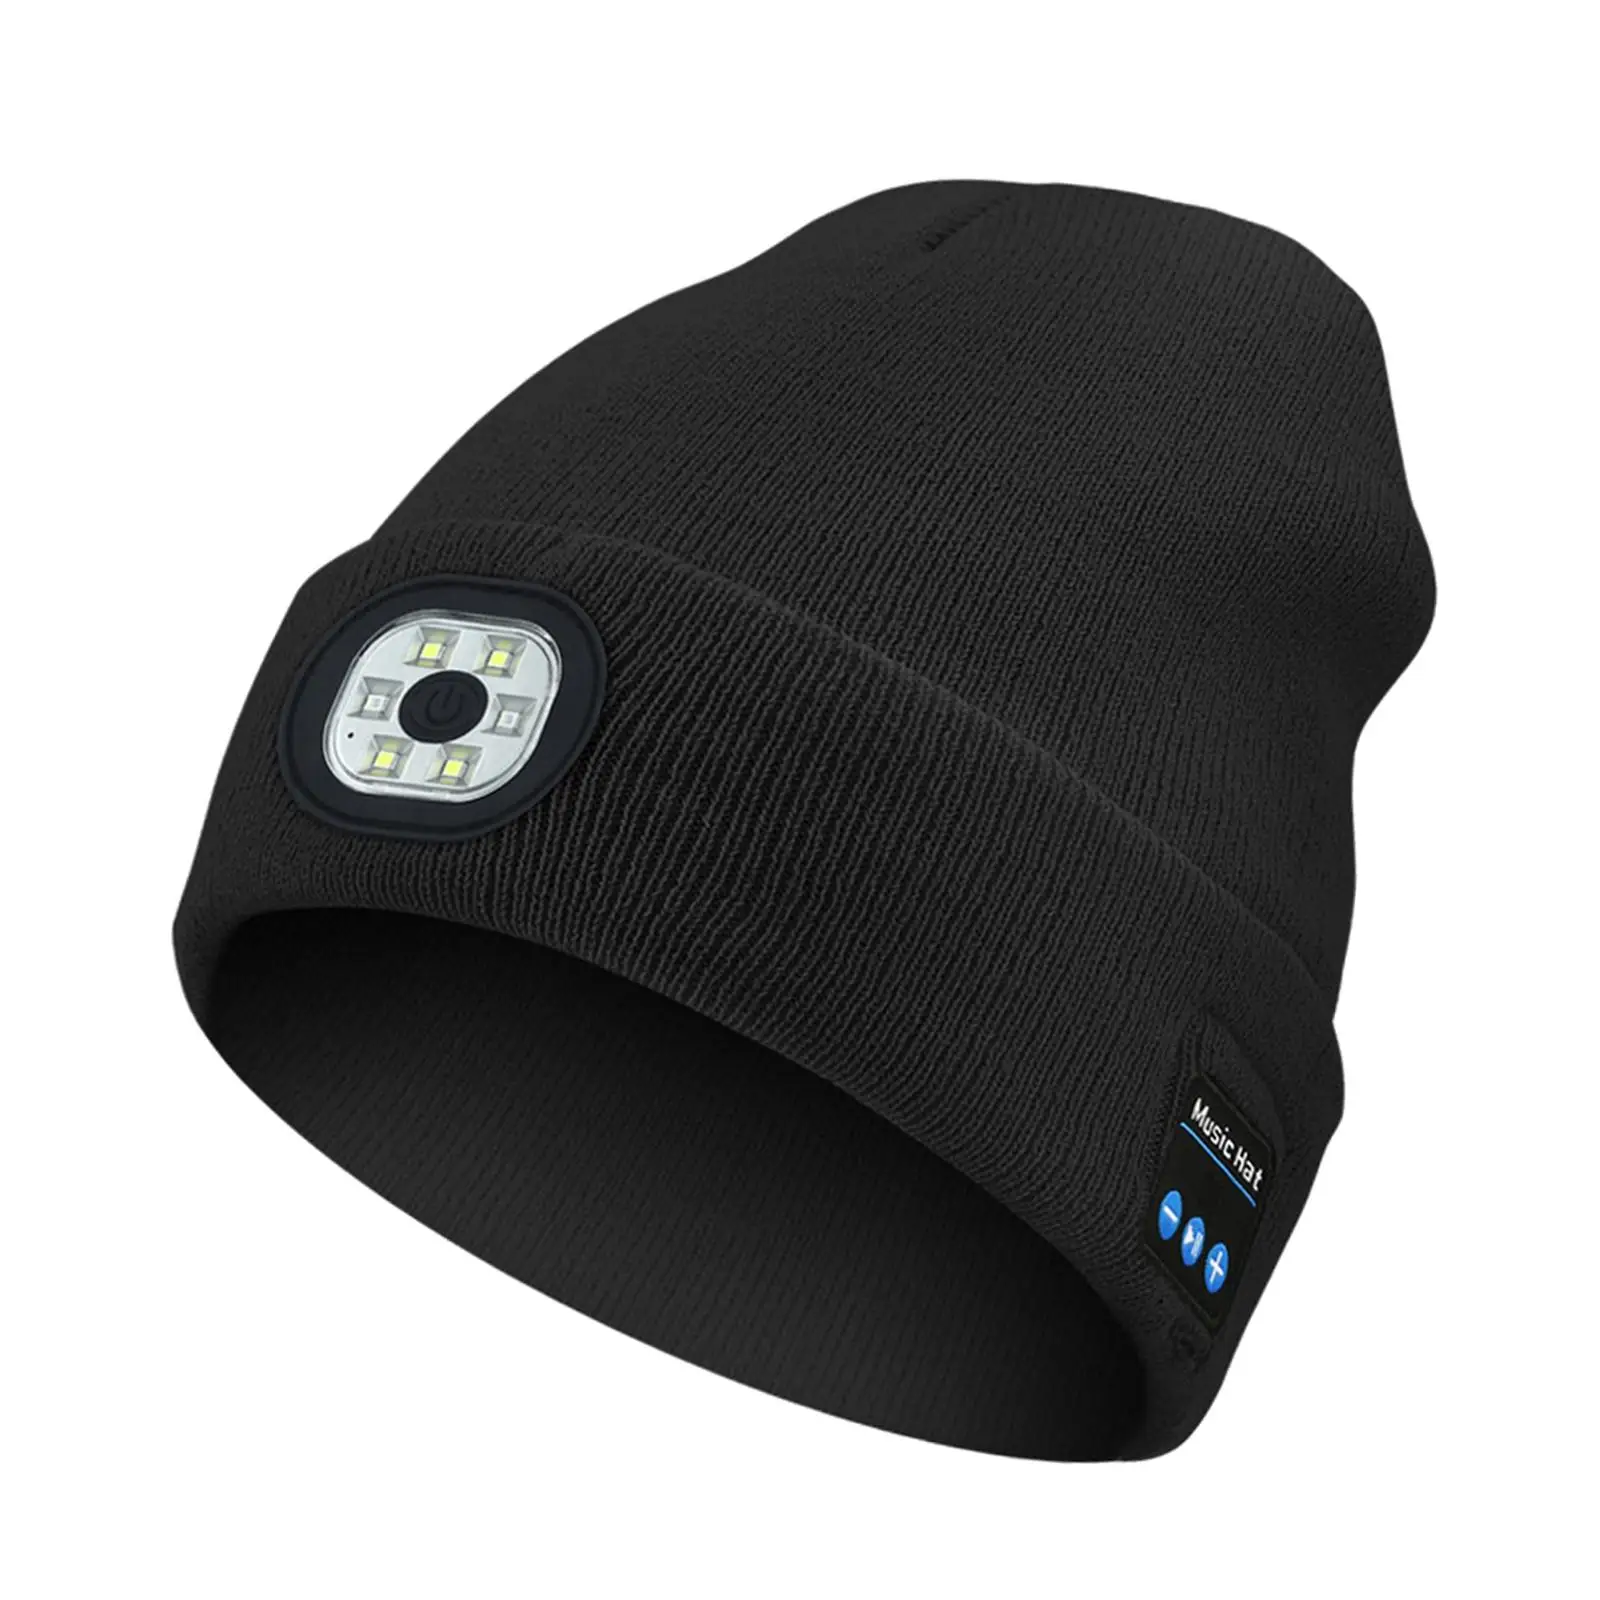 Wireless Knit Music Hat with Light with 3 Adjustable Brightness Settings Multipurpose Headphone for Holidays Night Party